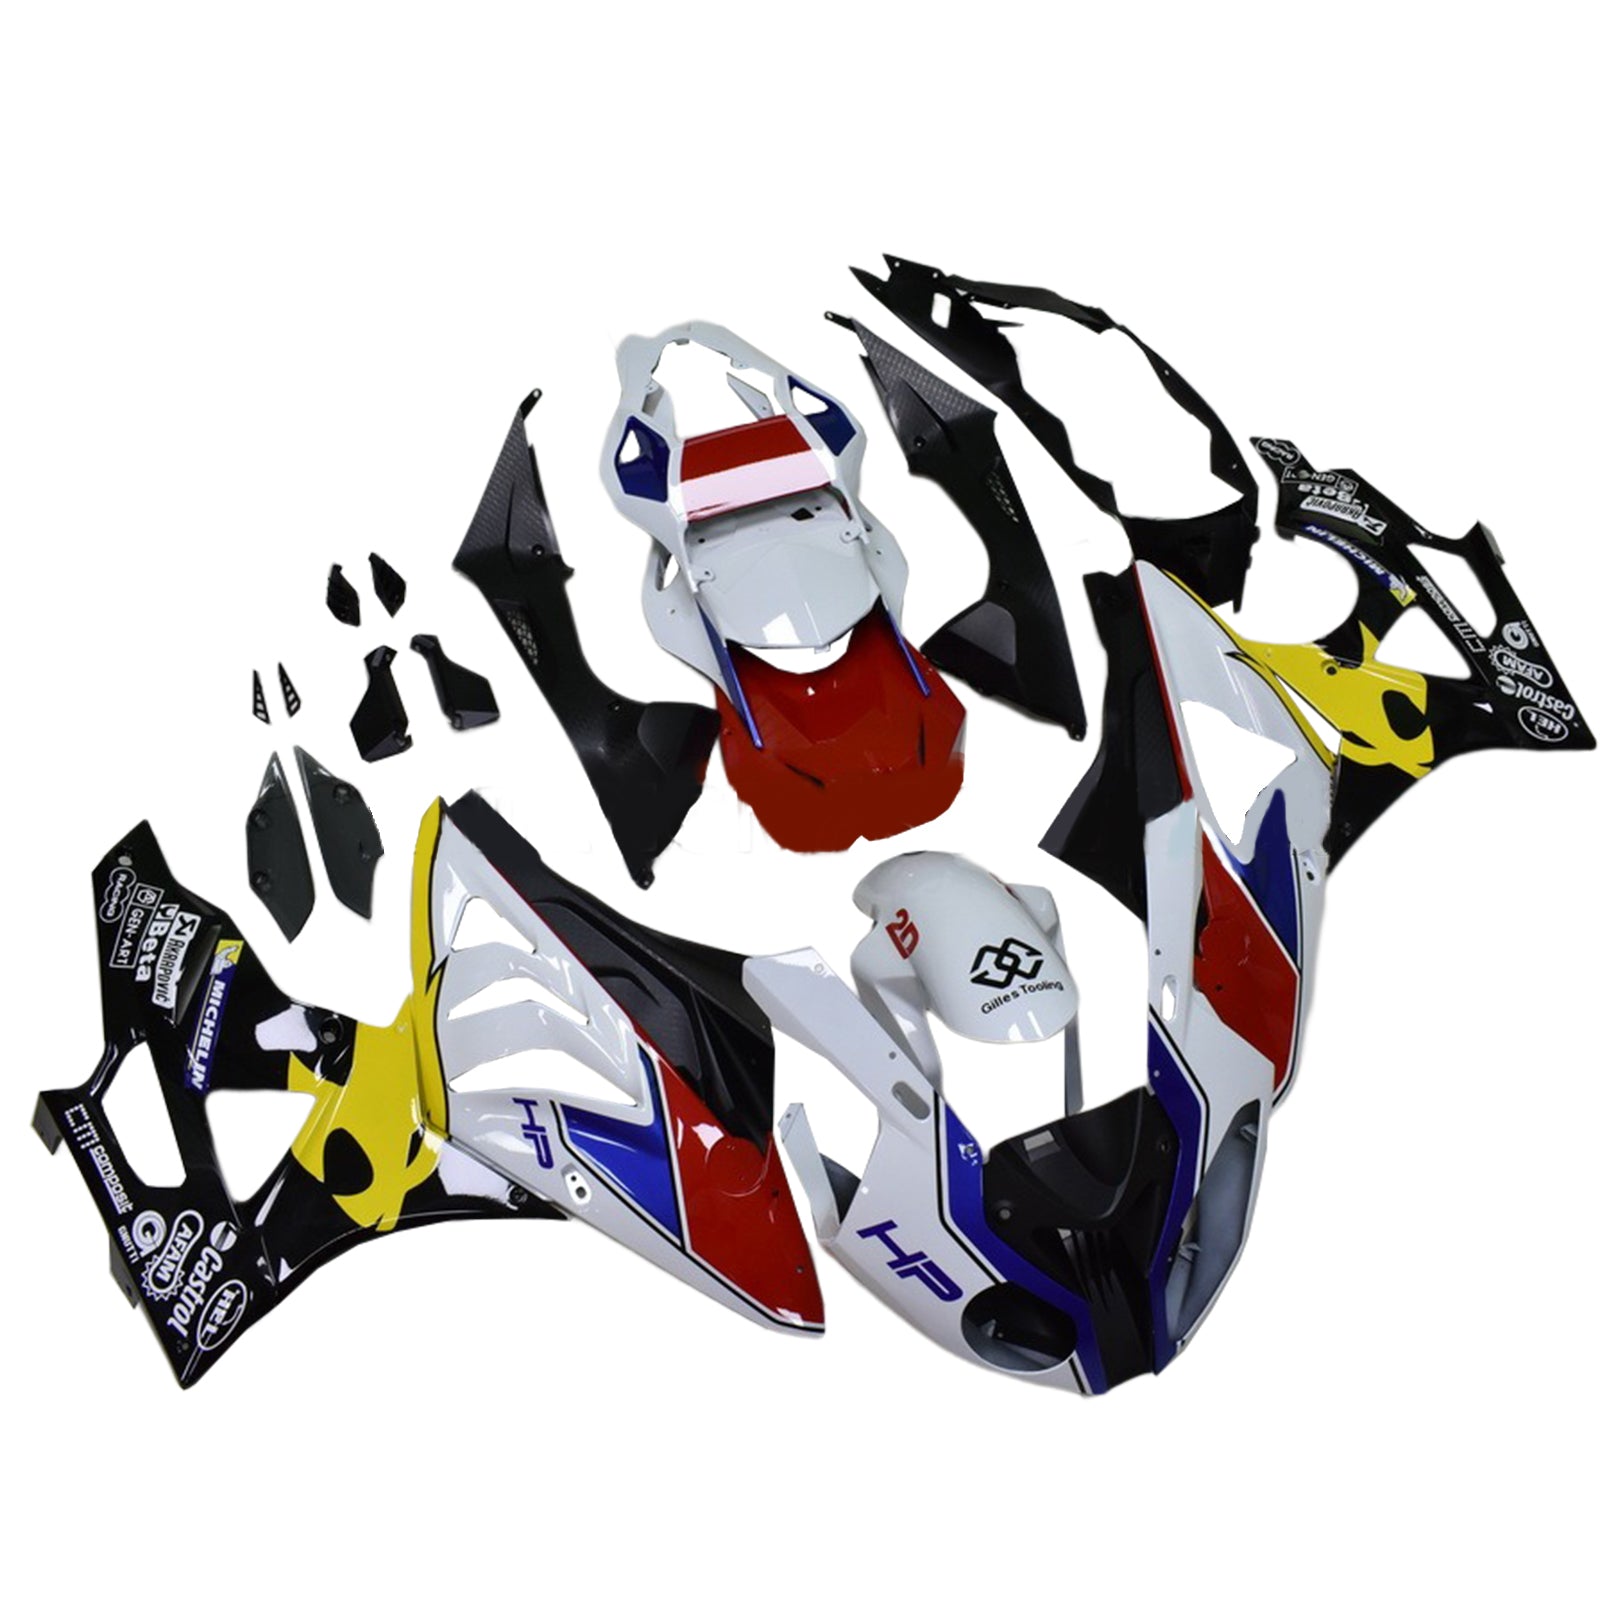 Amotopart Kit carena BMW S1000RR 2009-2014 Style2 bianco e rosso